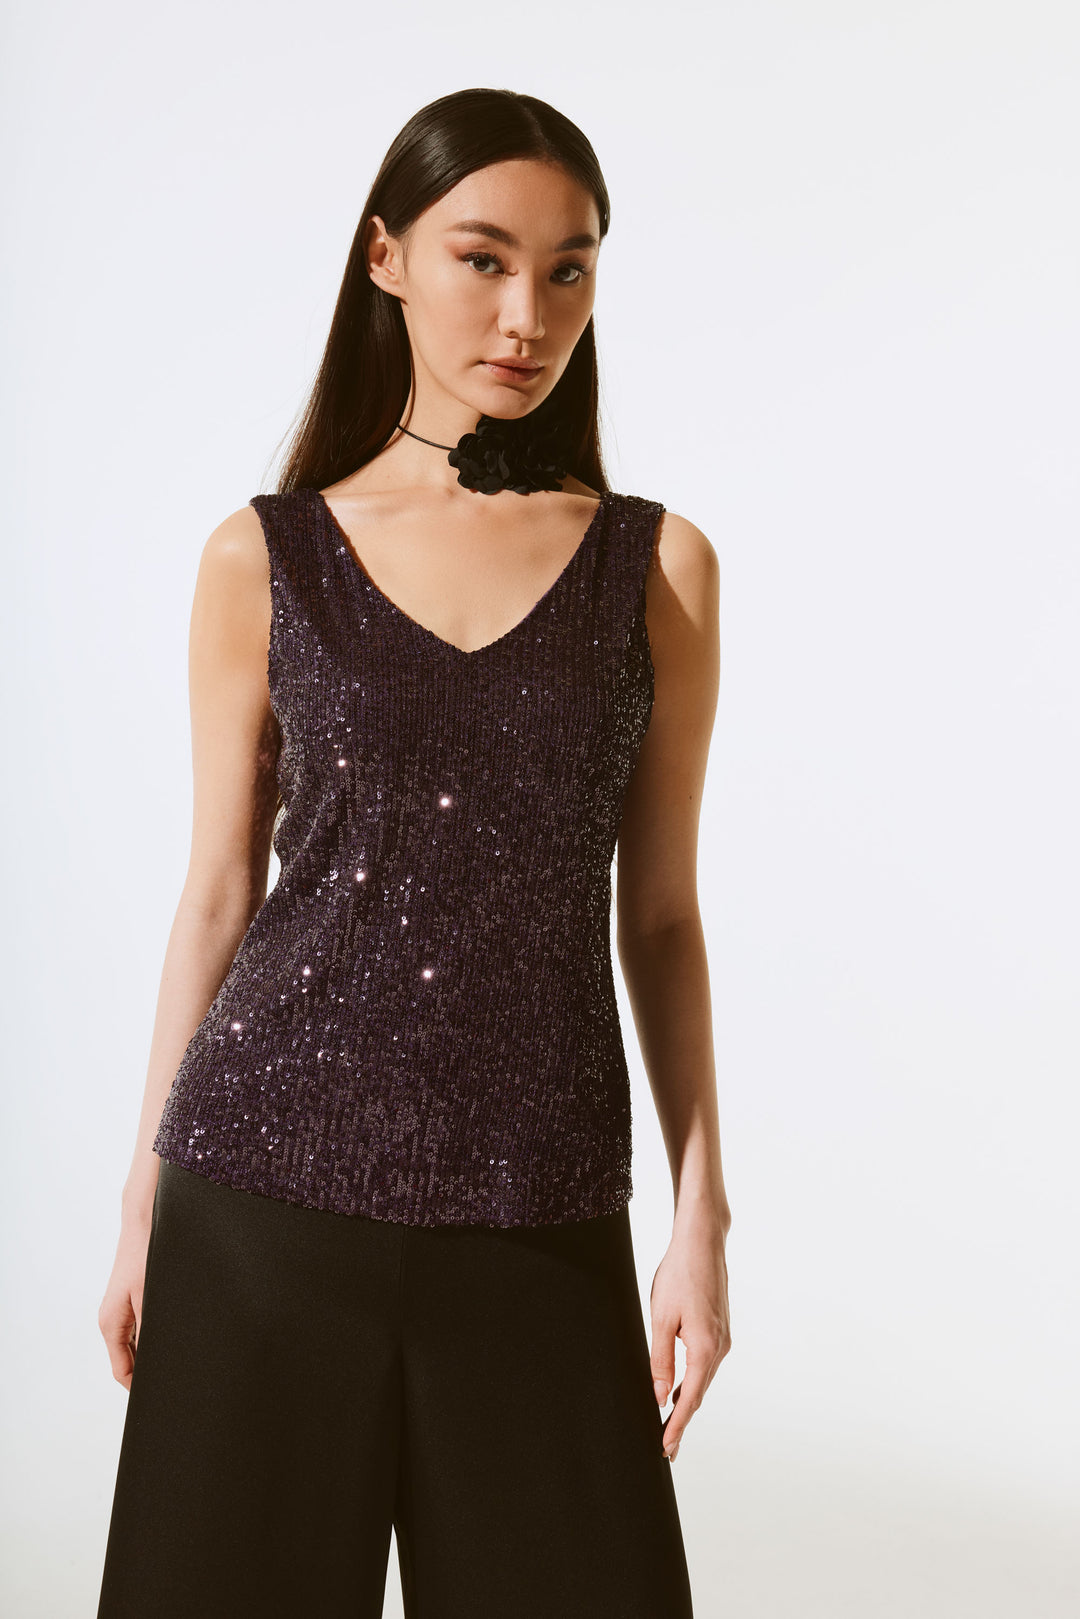 Joseph Ribkoff Fall 2024 This sleeveless top by Joseph Ribkoff is a must-have for a special event! Your look is sure to catch the eye with the shimmer of sequin fabric and the high-quality construction of the v- neck, sleeveless style.